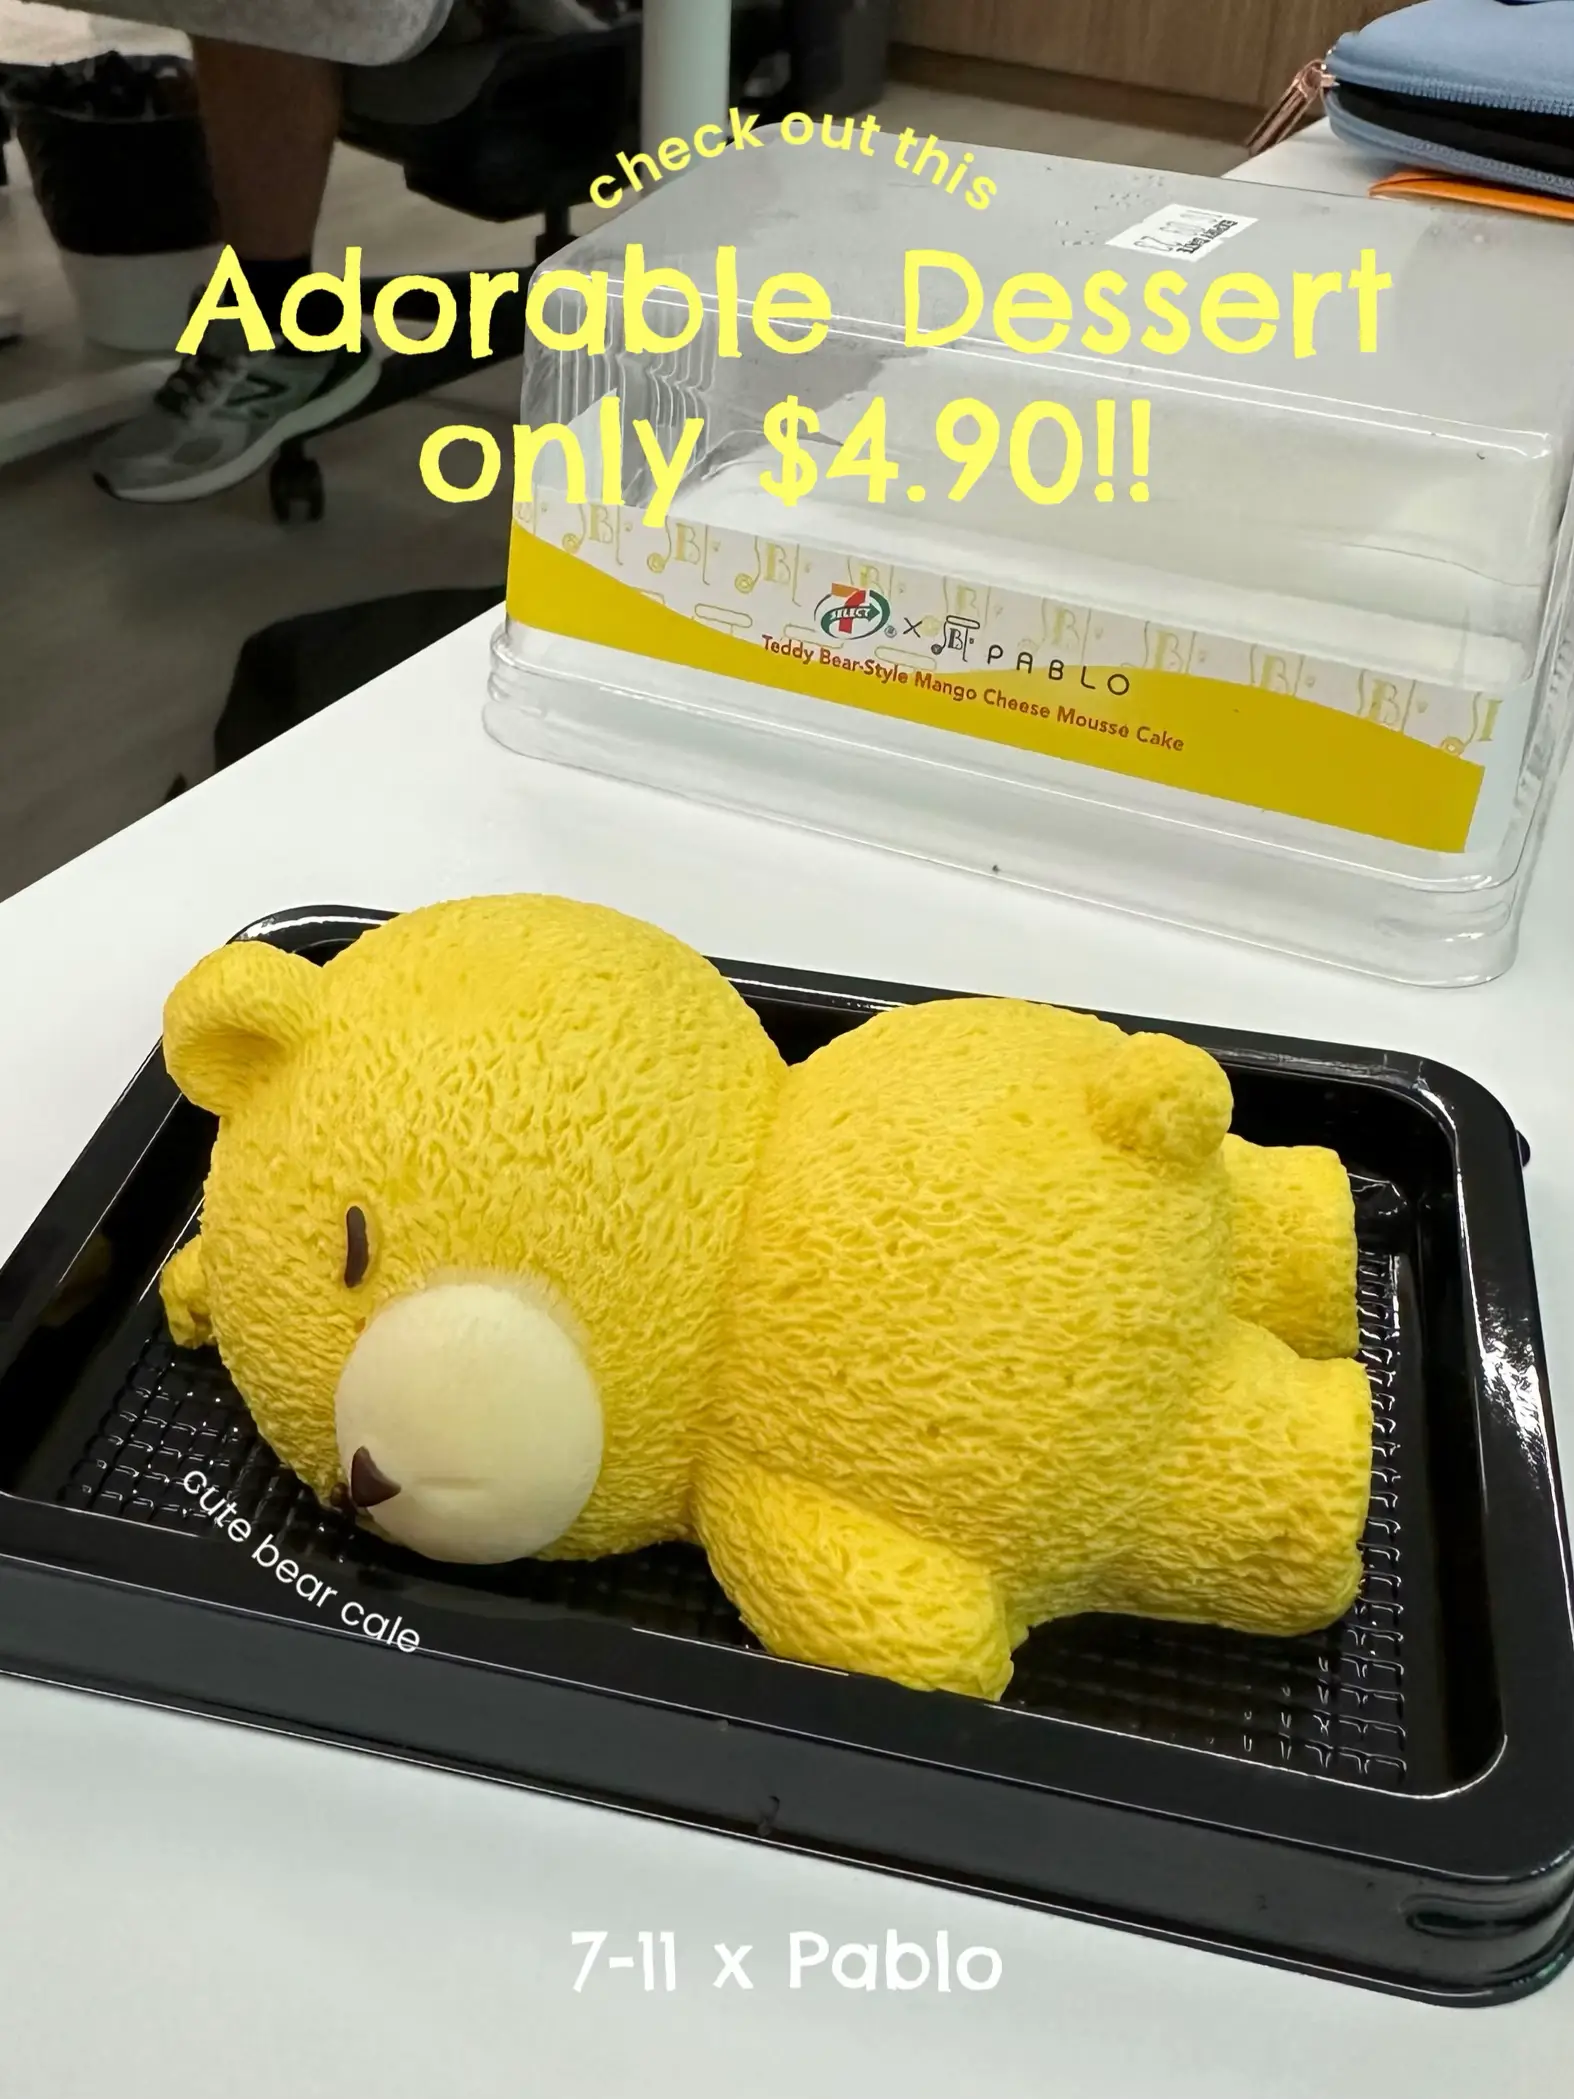 cute dessert for $4.90!!'s images(0)